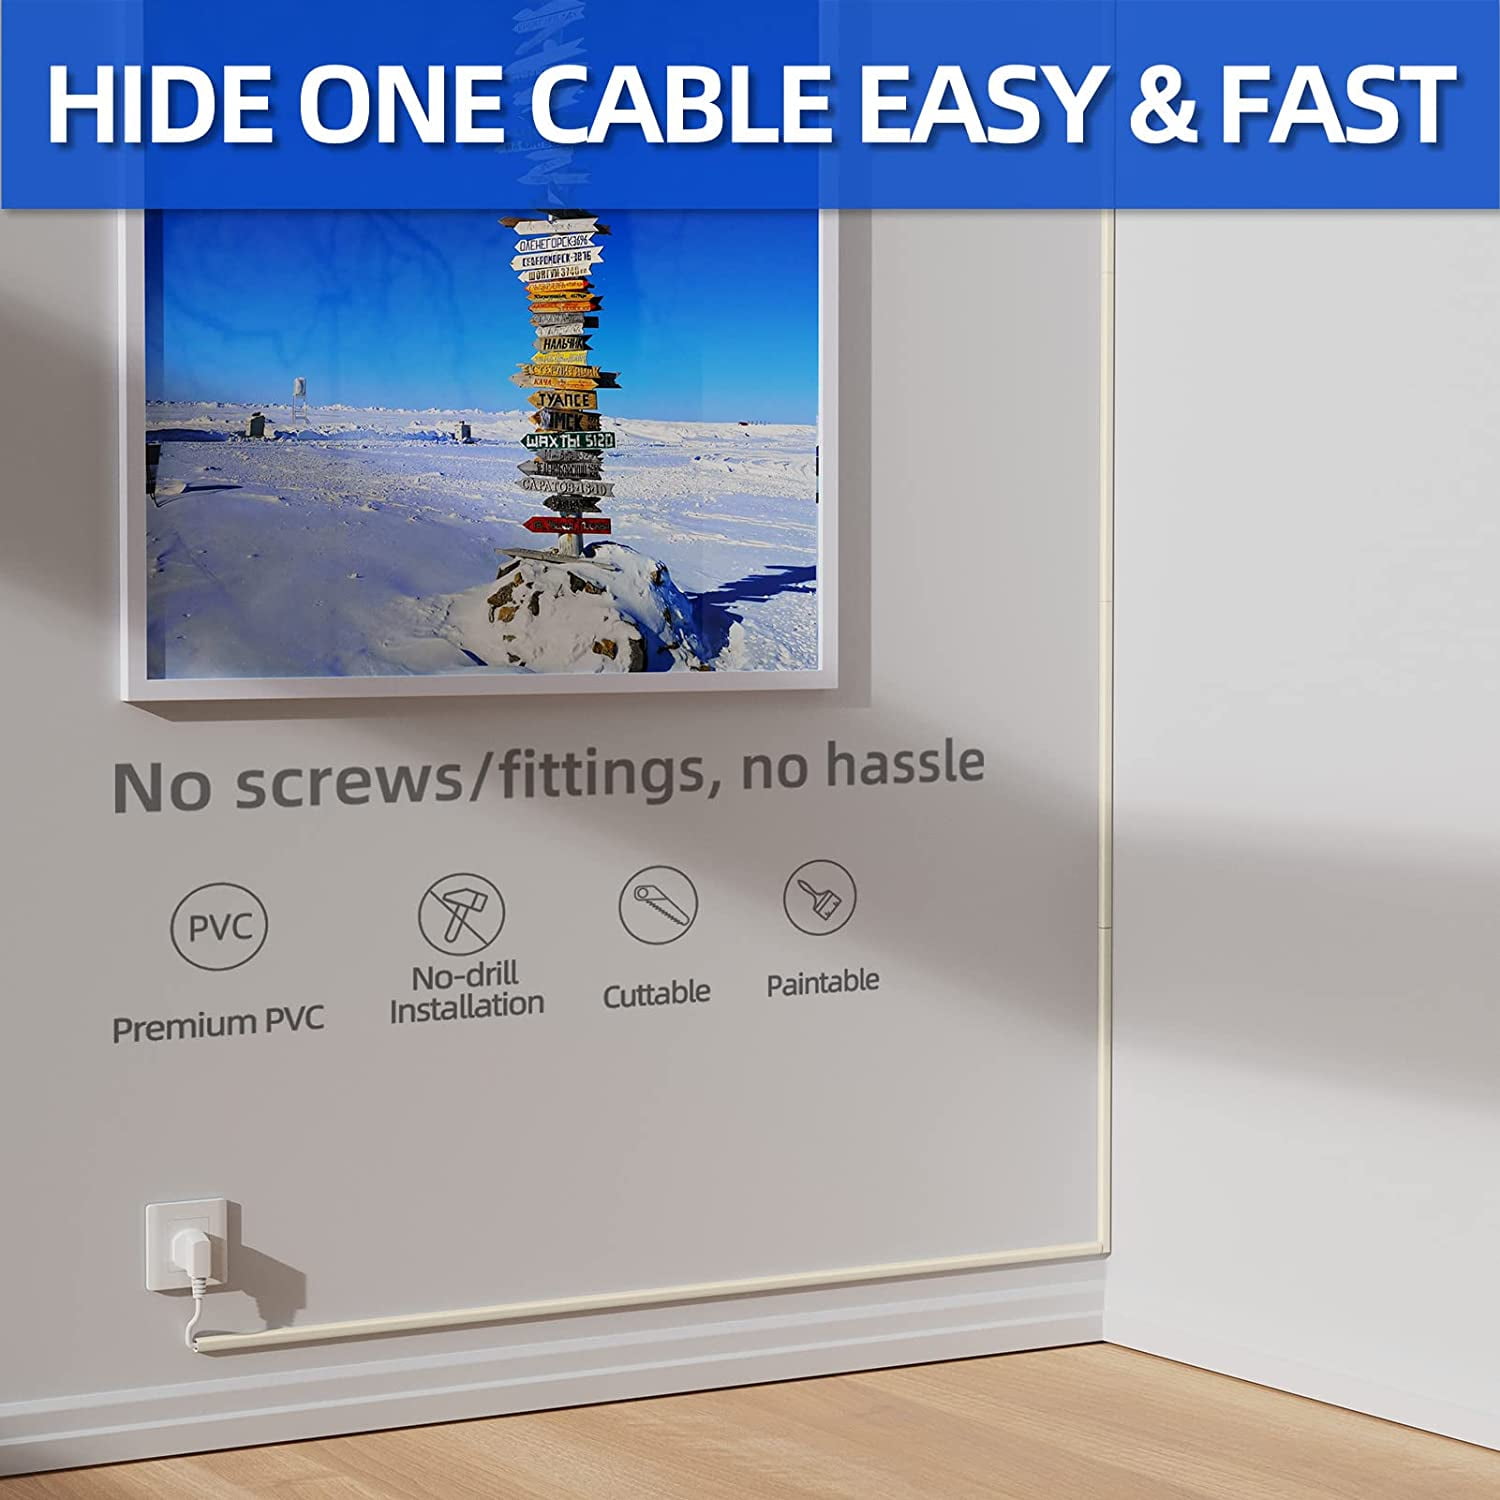 250in Cord Hider - One-Cord Cable Concealer - Yecaye Small Cord Cover on  Wall Cable Management System 